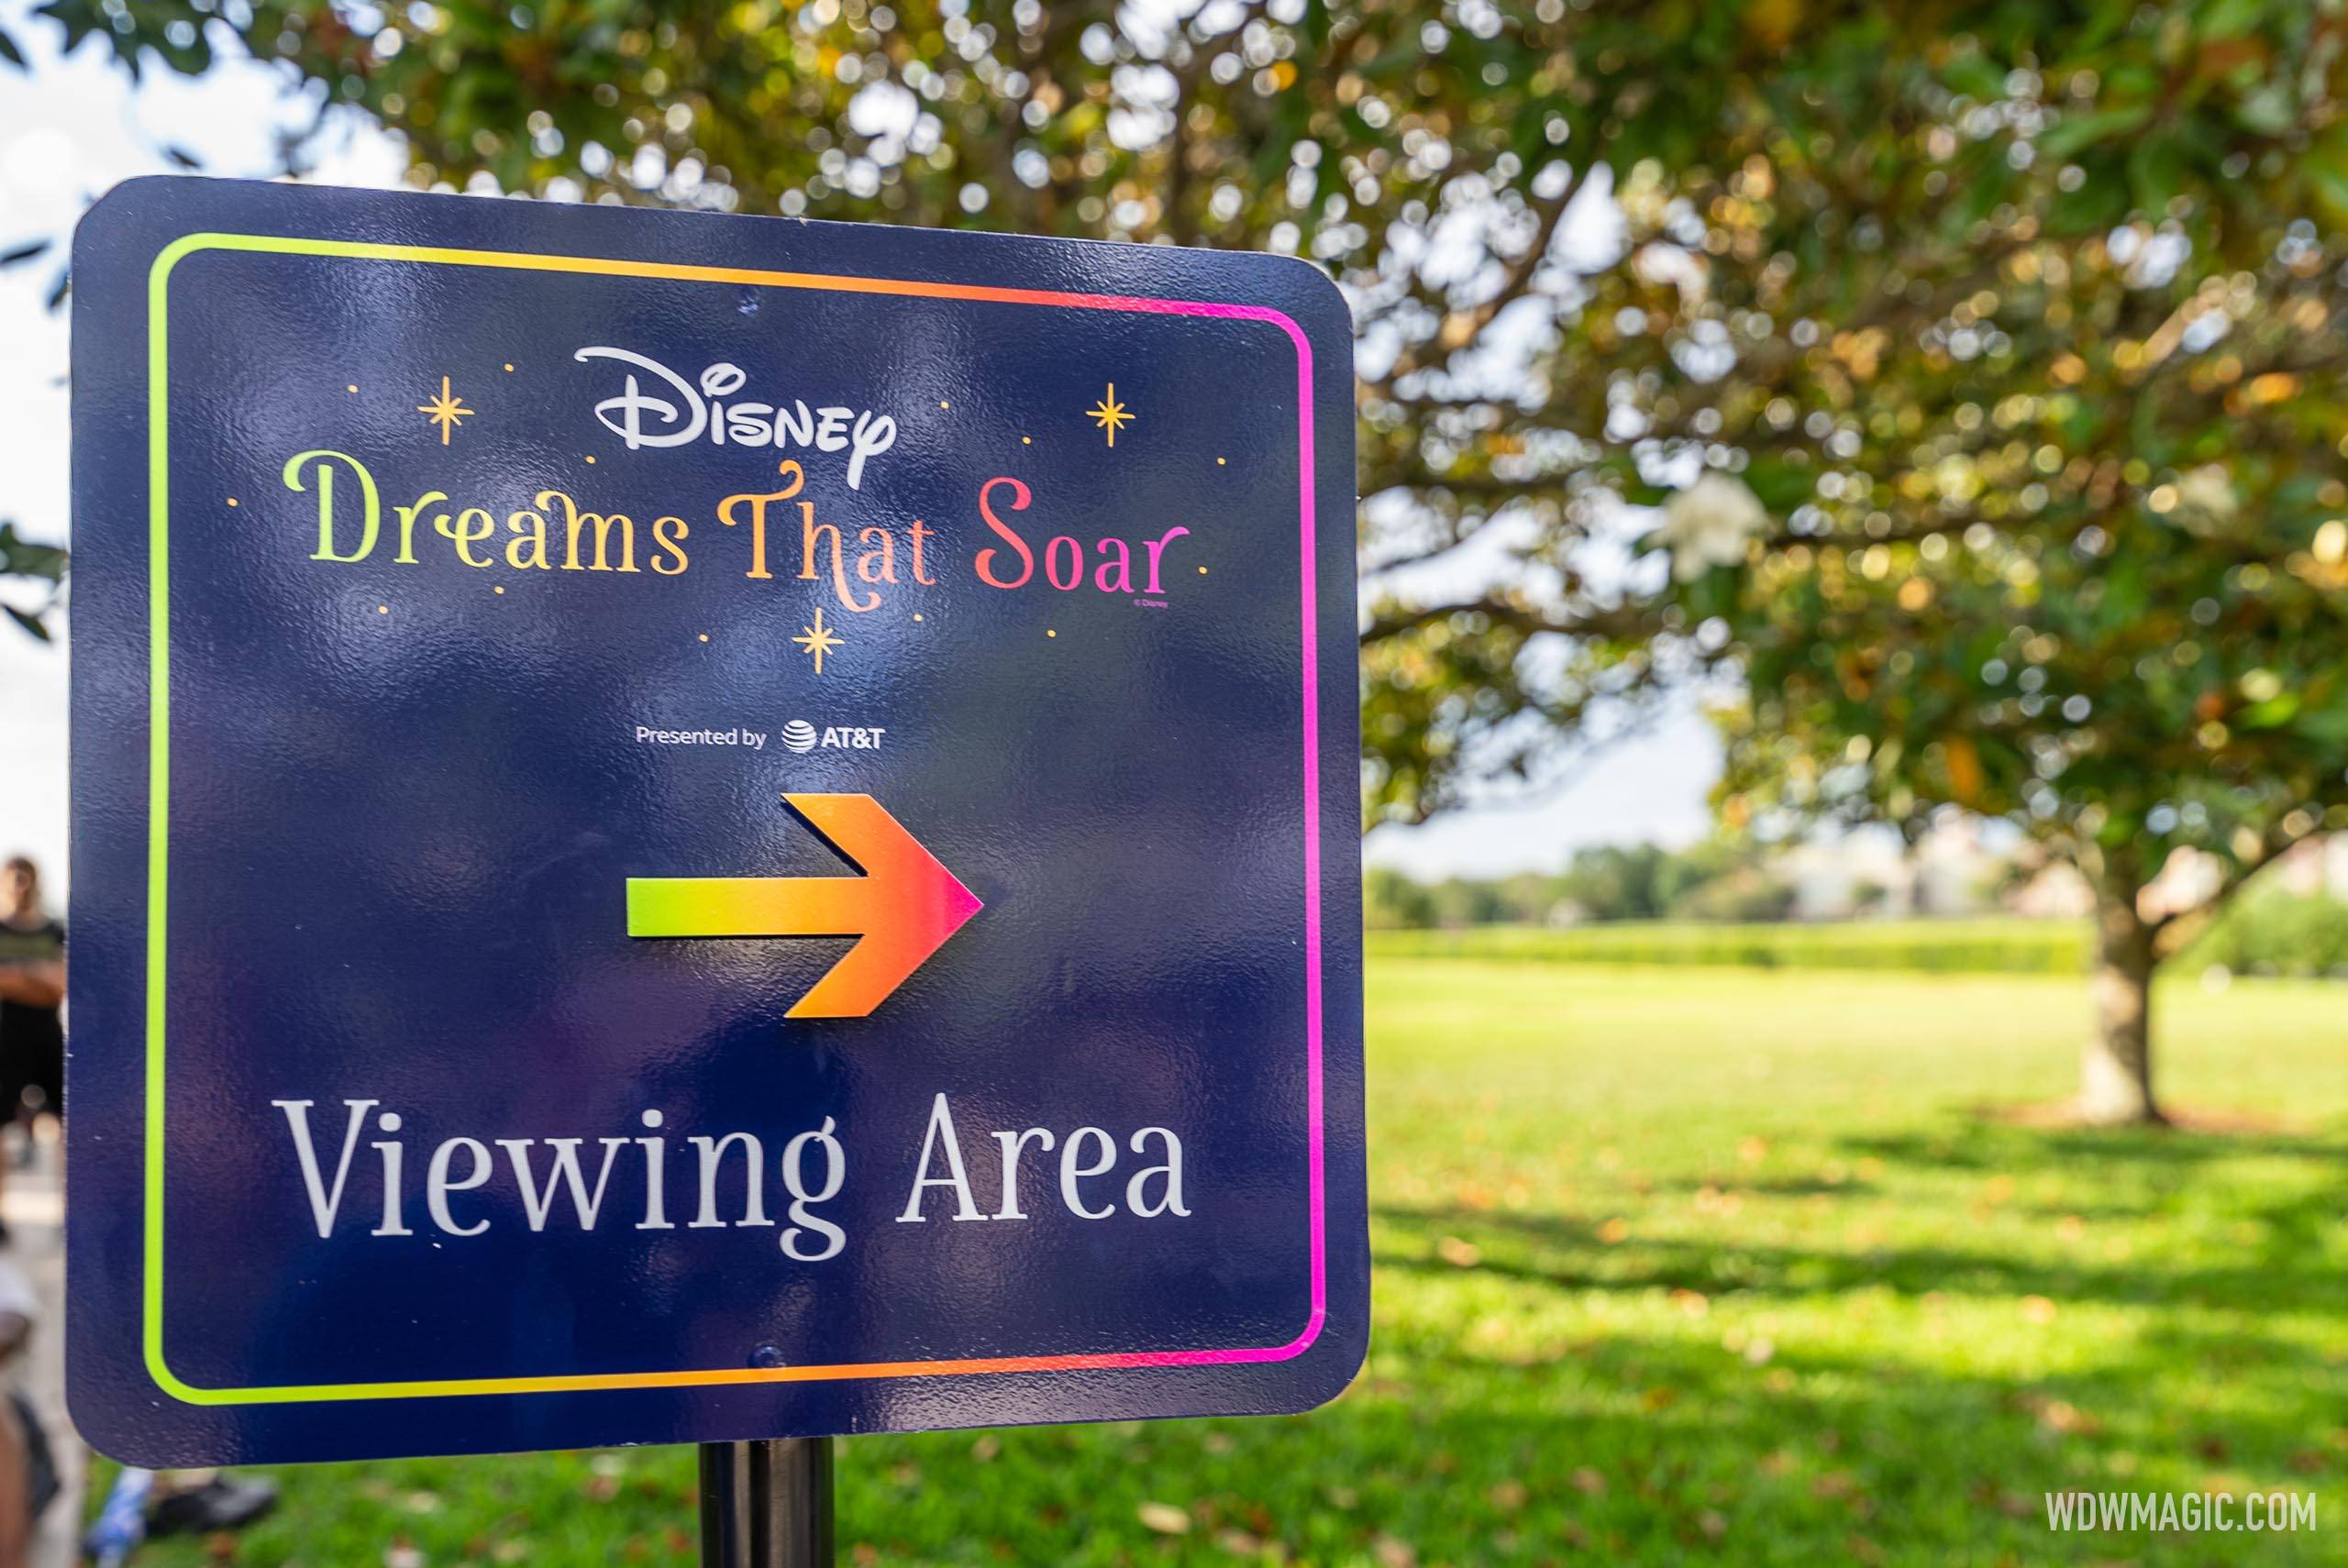 How To See The New 'Disney Dreams That Soar' Drone Show at Walt Disney World